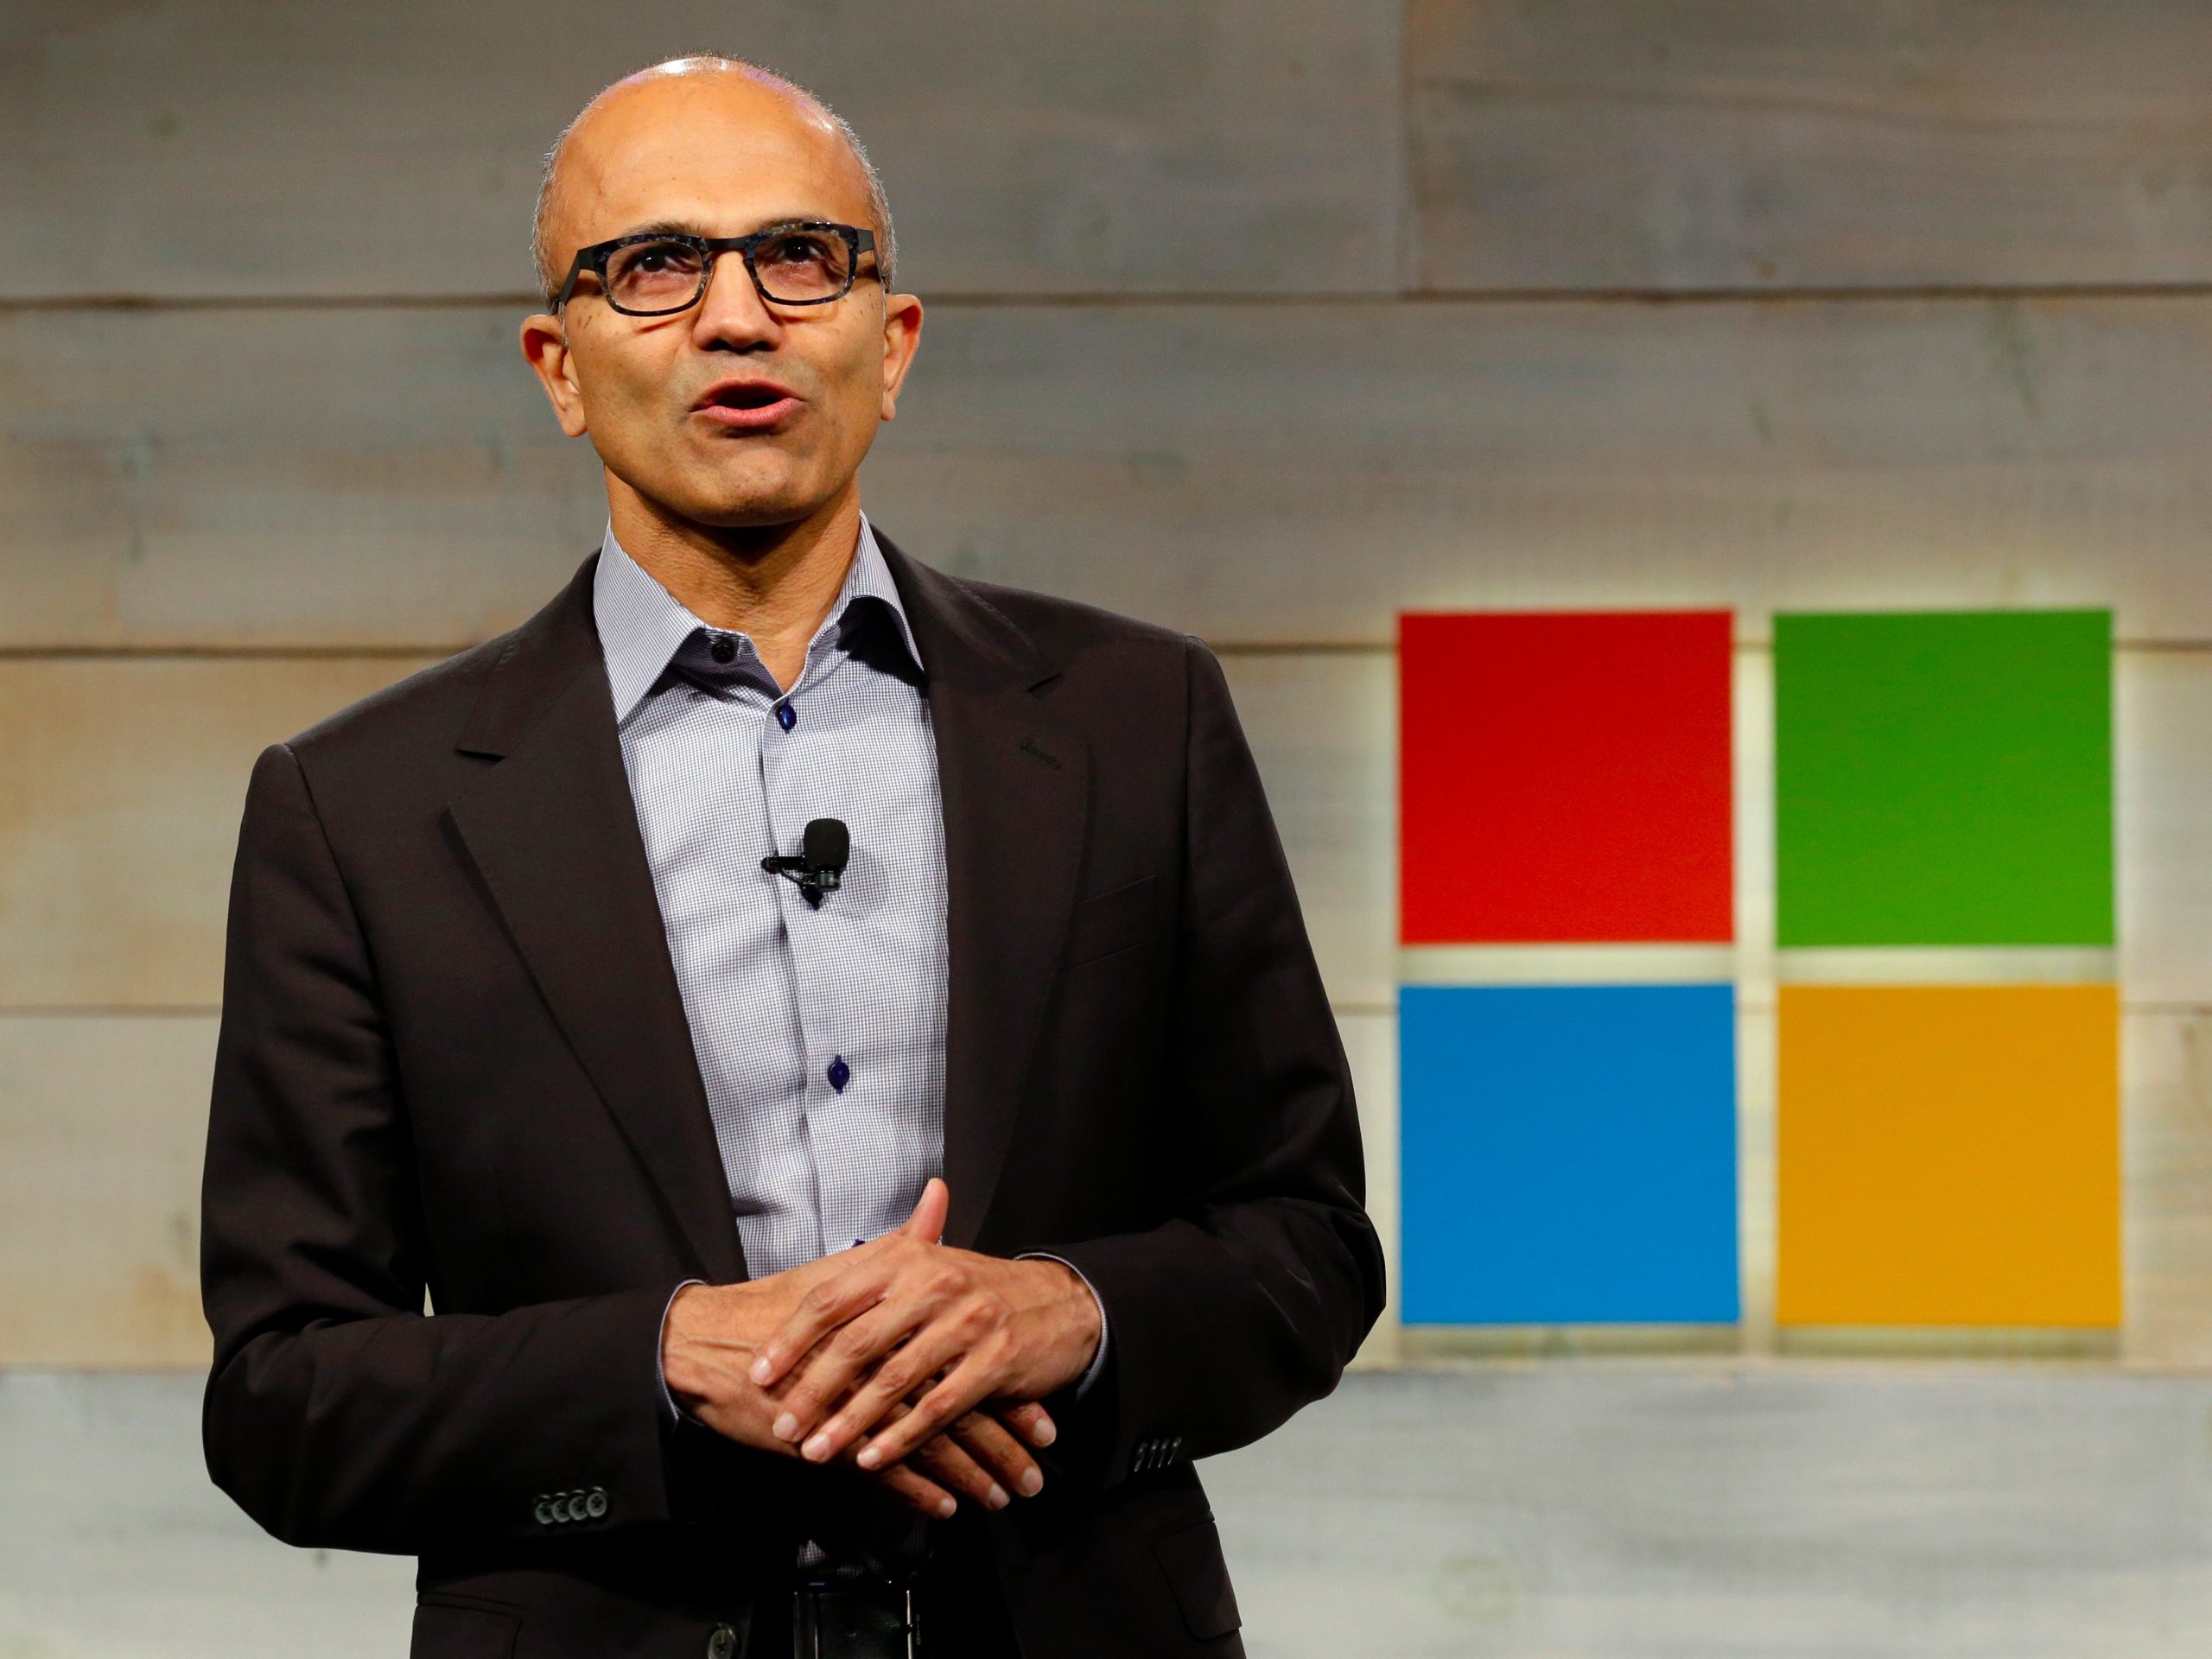 No salary increases for full-time employees this year in Microsoft